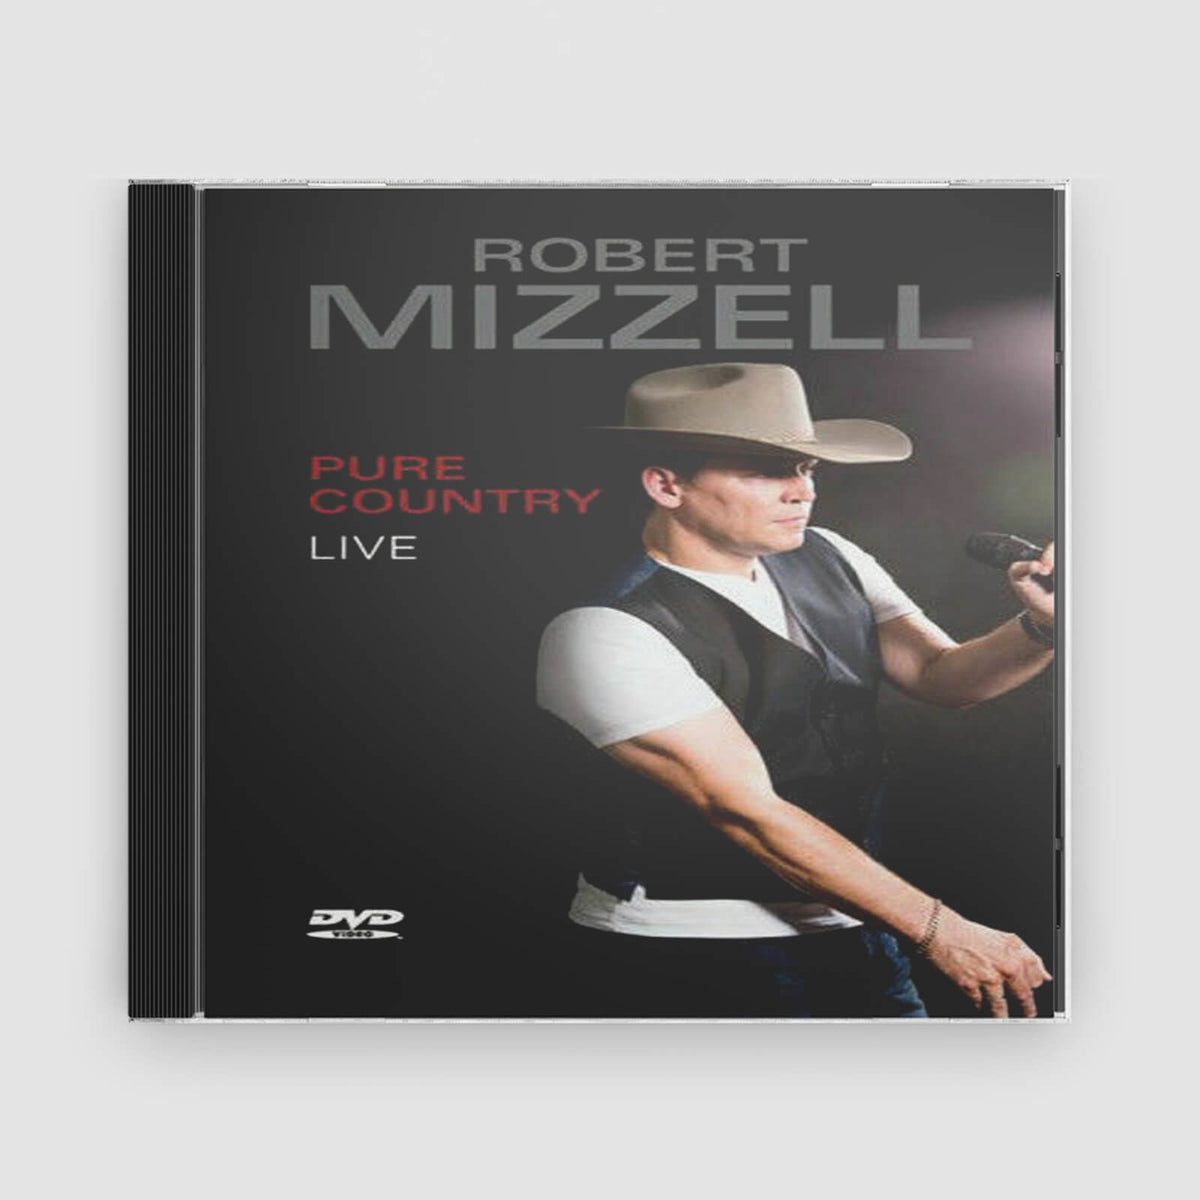 Robert Mizzell : Pure Country Live (DVD)